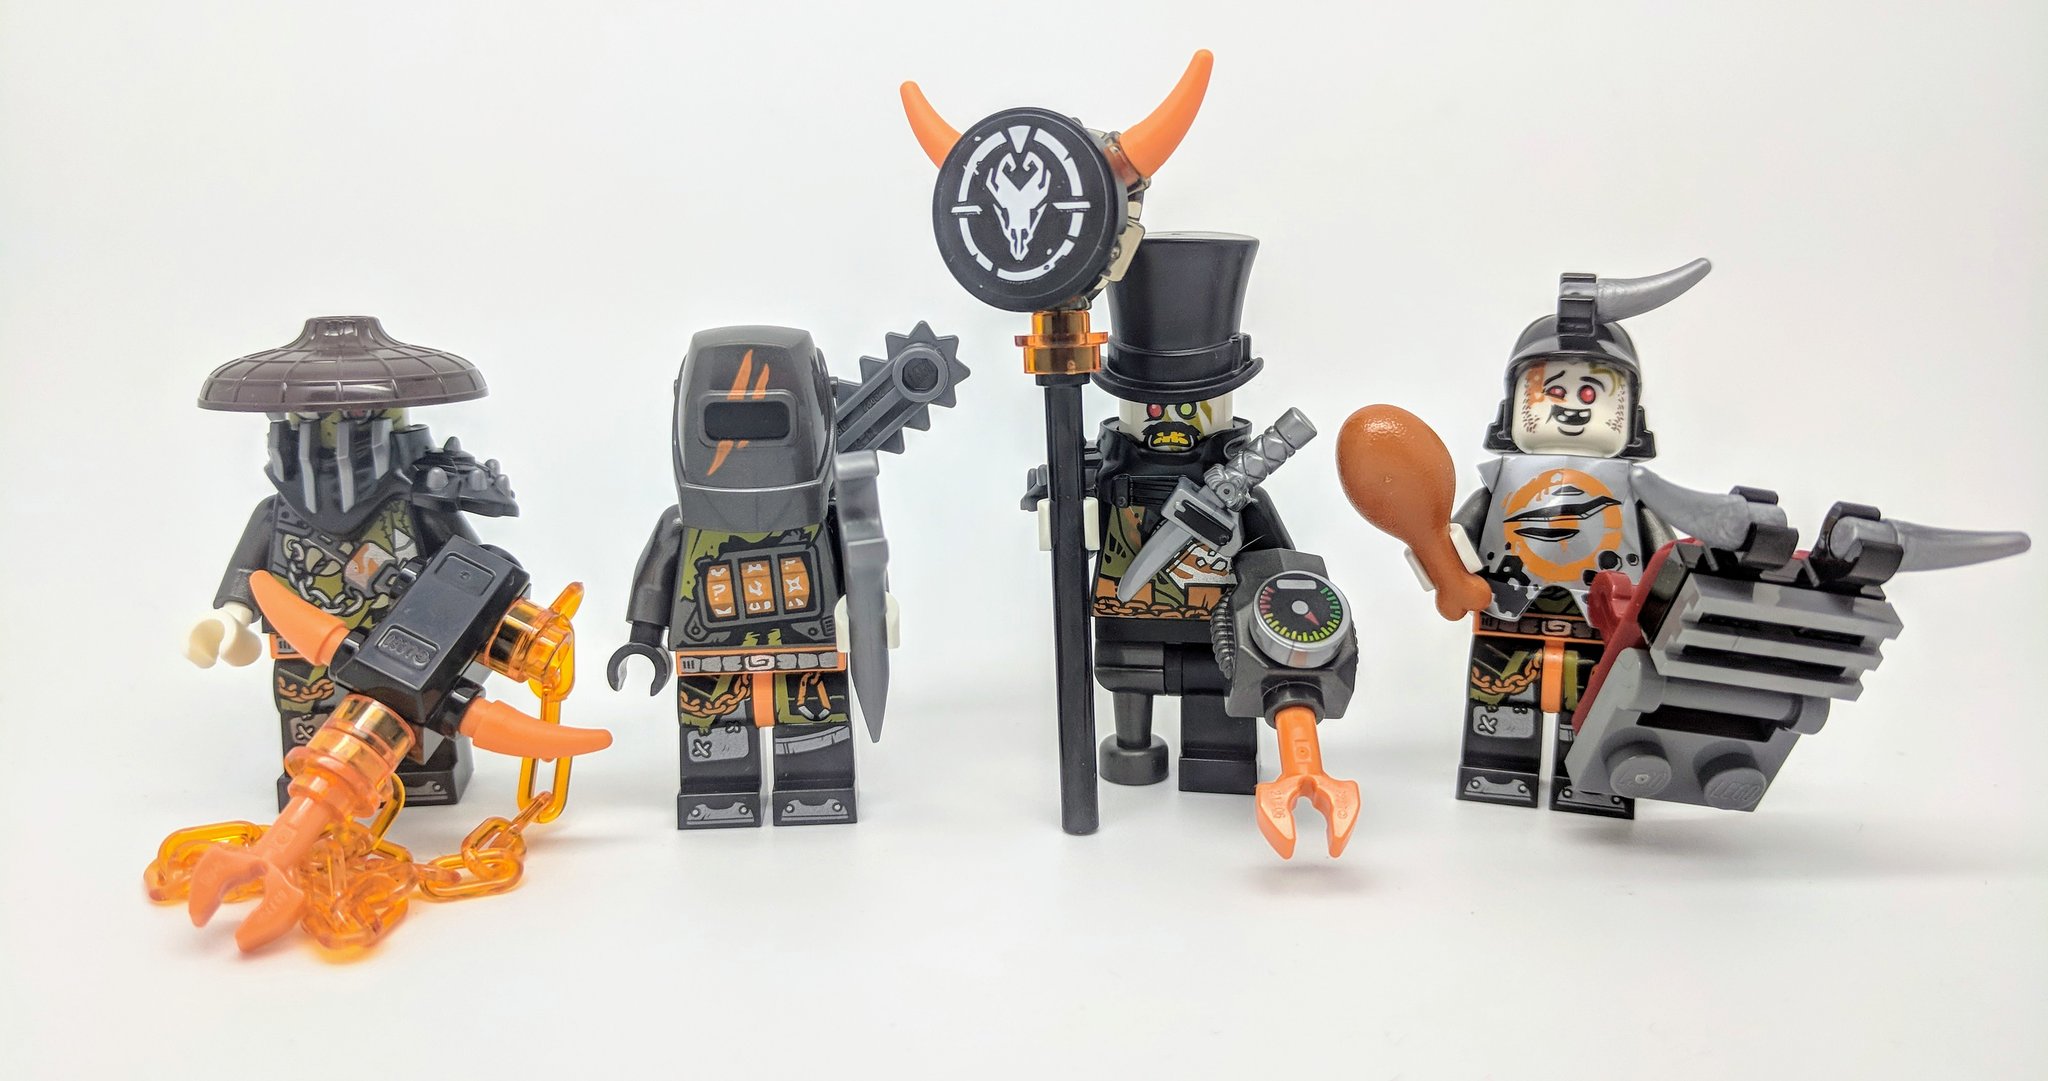 BricksFanz on Twitter: "Ace character design on the Dragon Hunters from the NINJAGO sets, certainly a motley crew https://t.co/UOvUEOz2vH" / Twitter